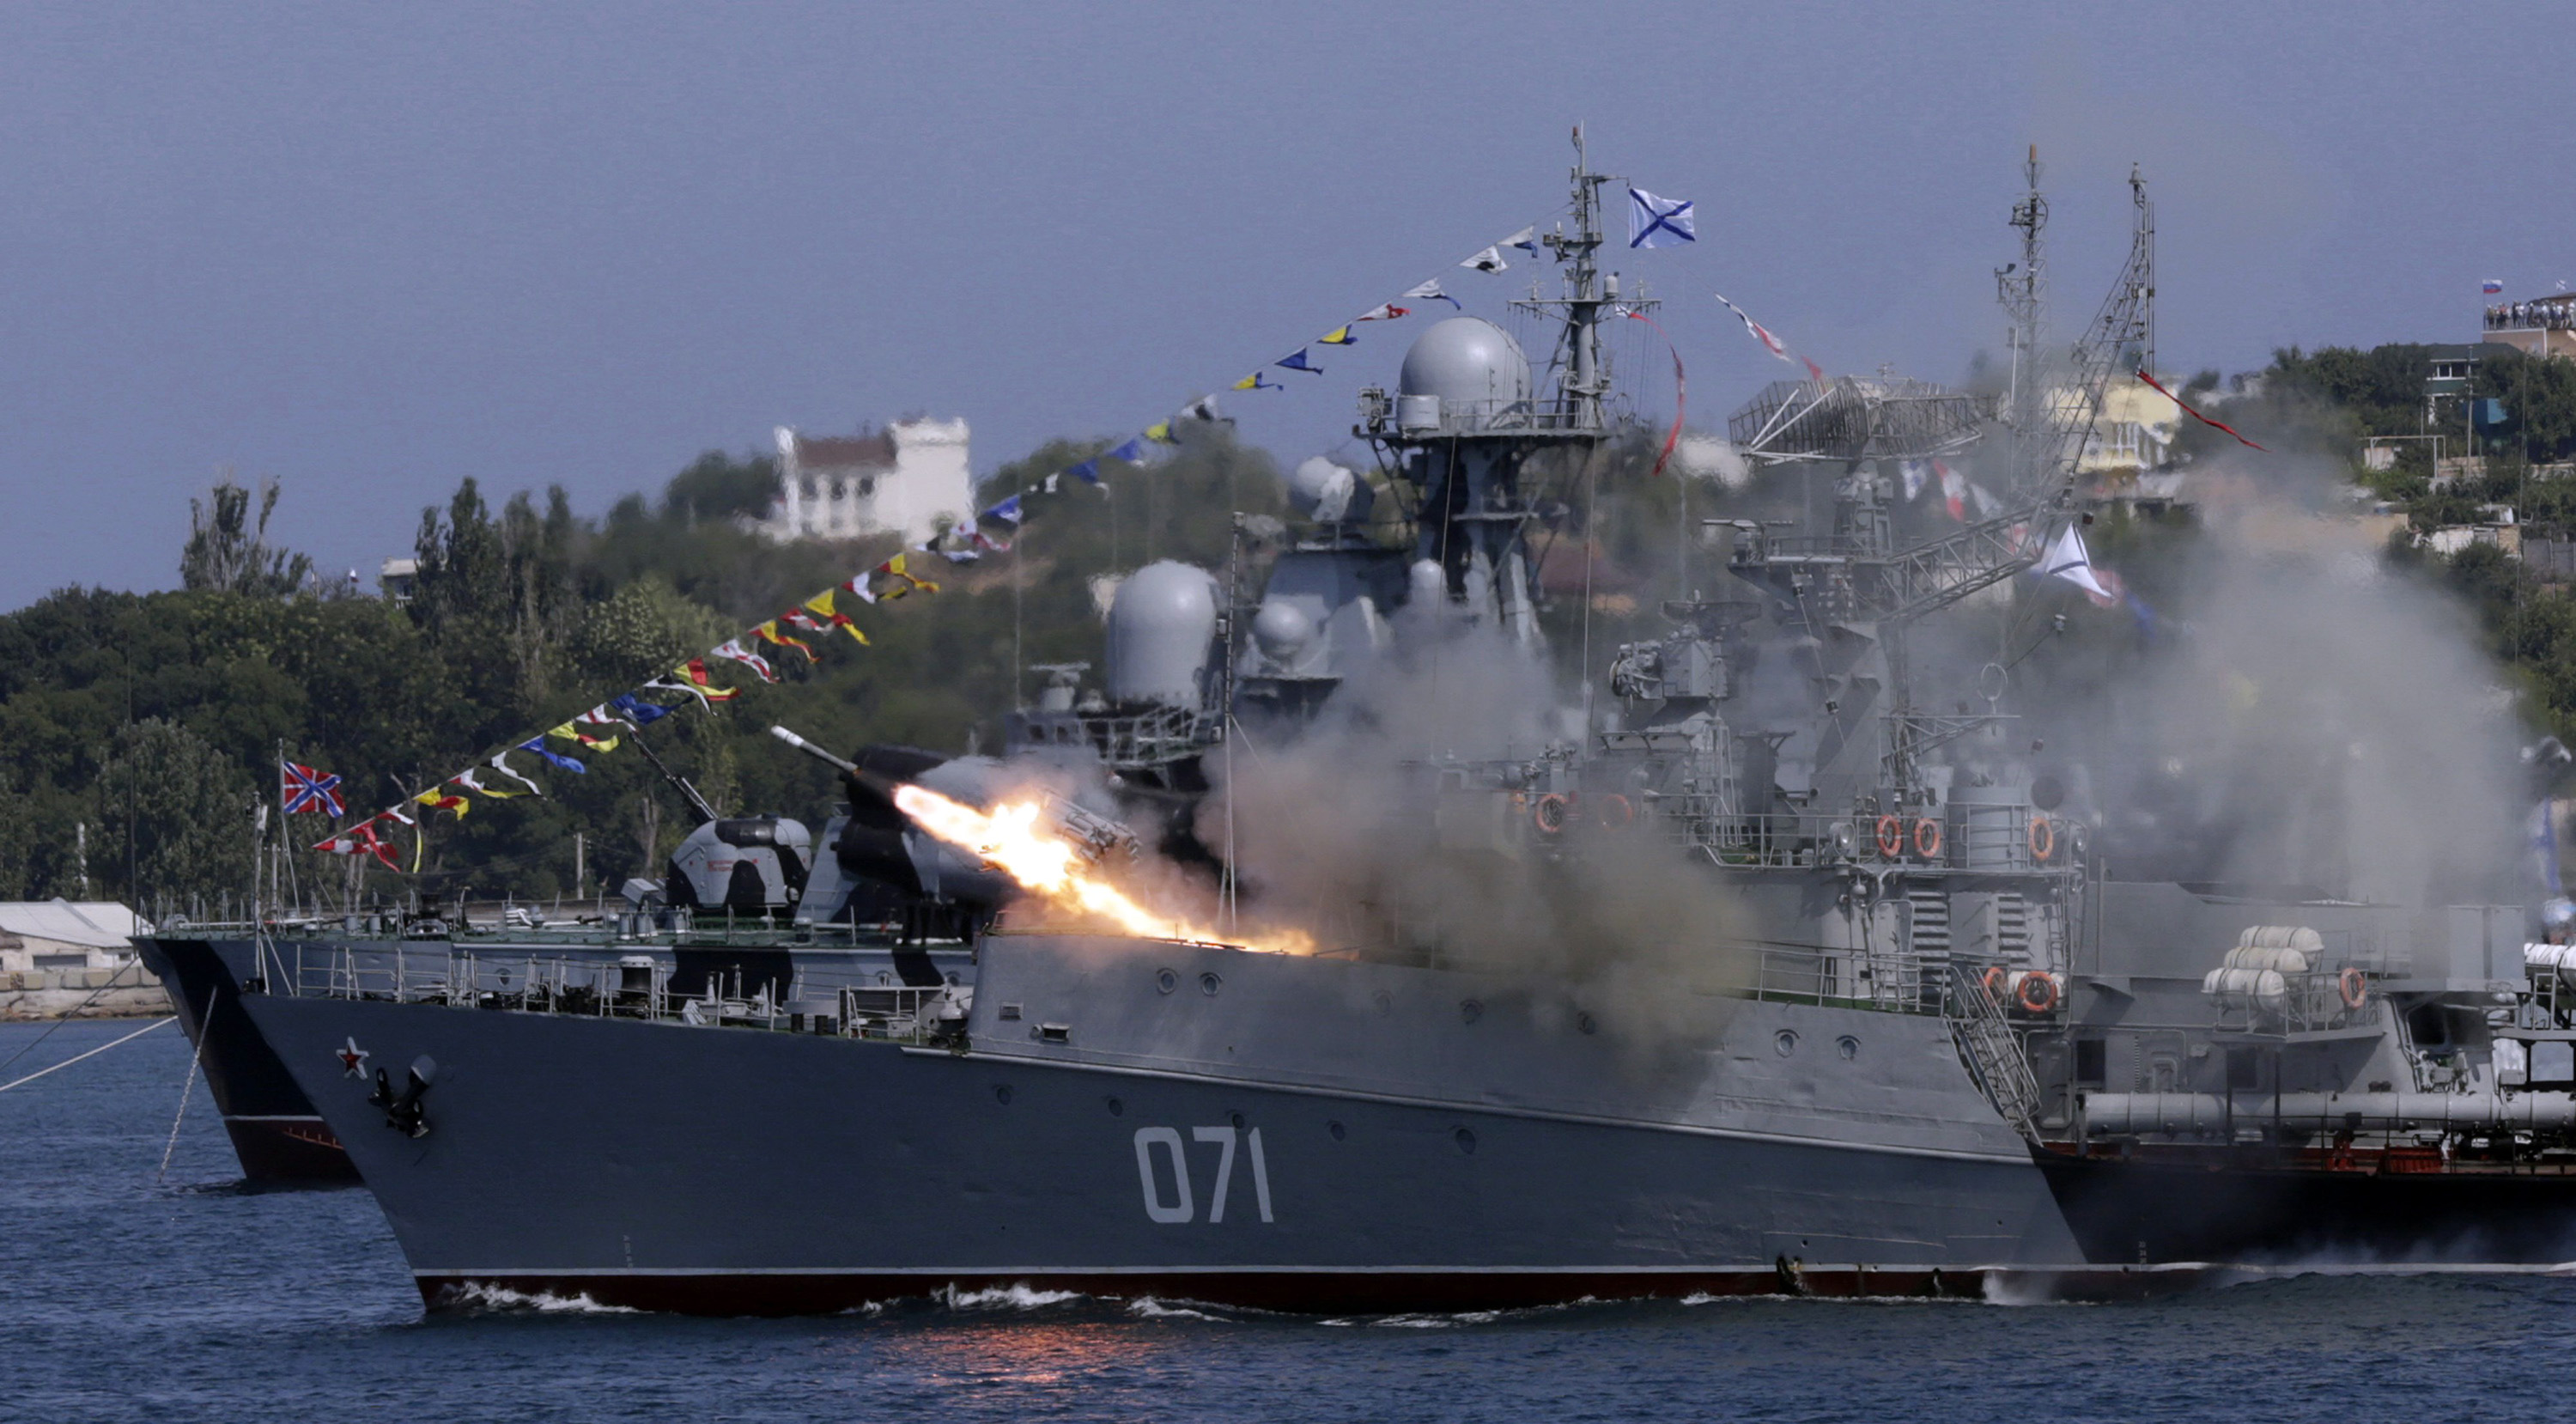 A Russian Navy ship fires missiles during Navy Day celebrations in Sevastopol in 2015.